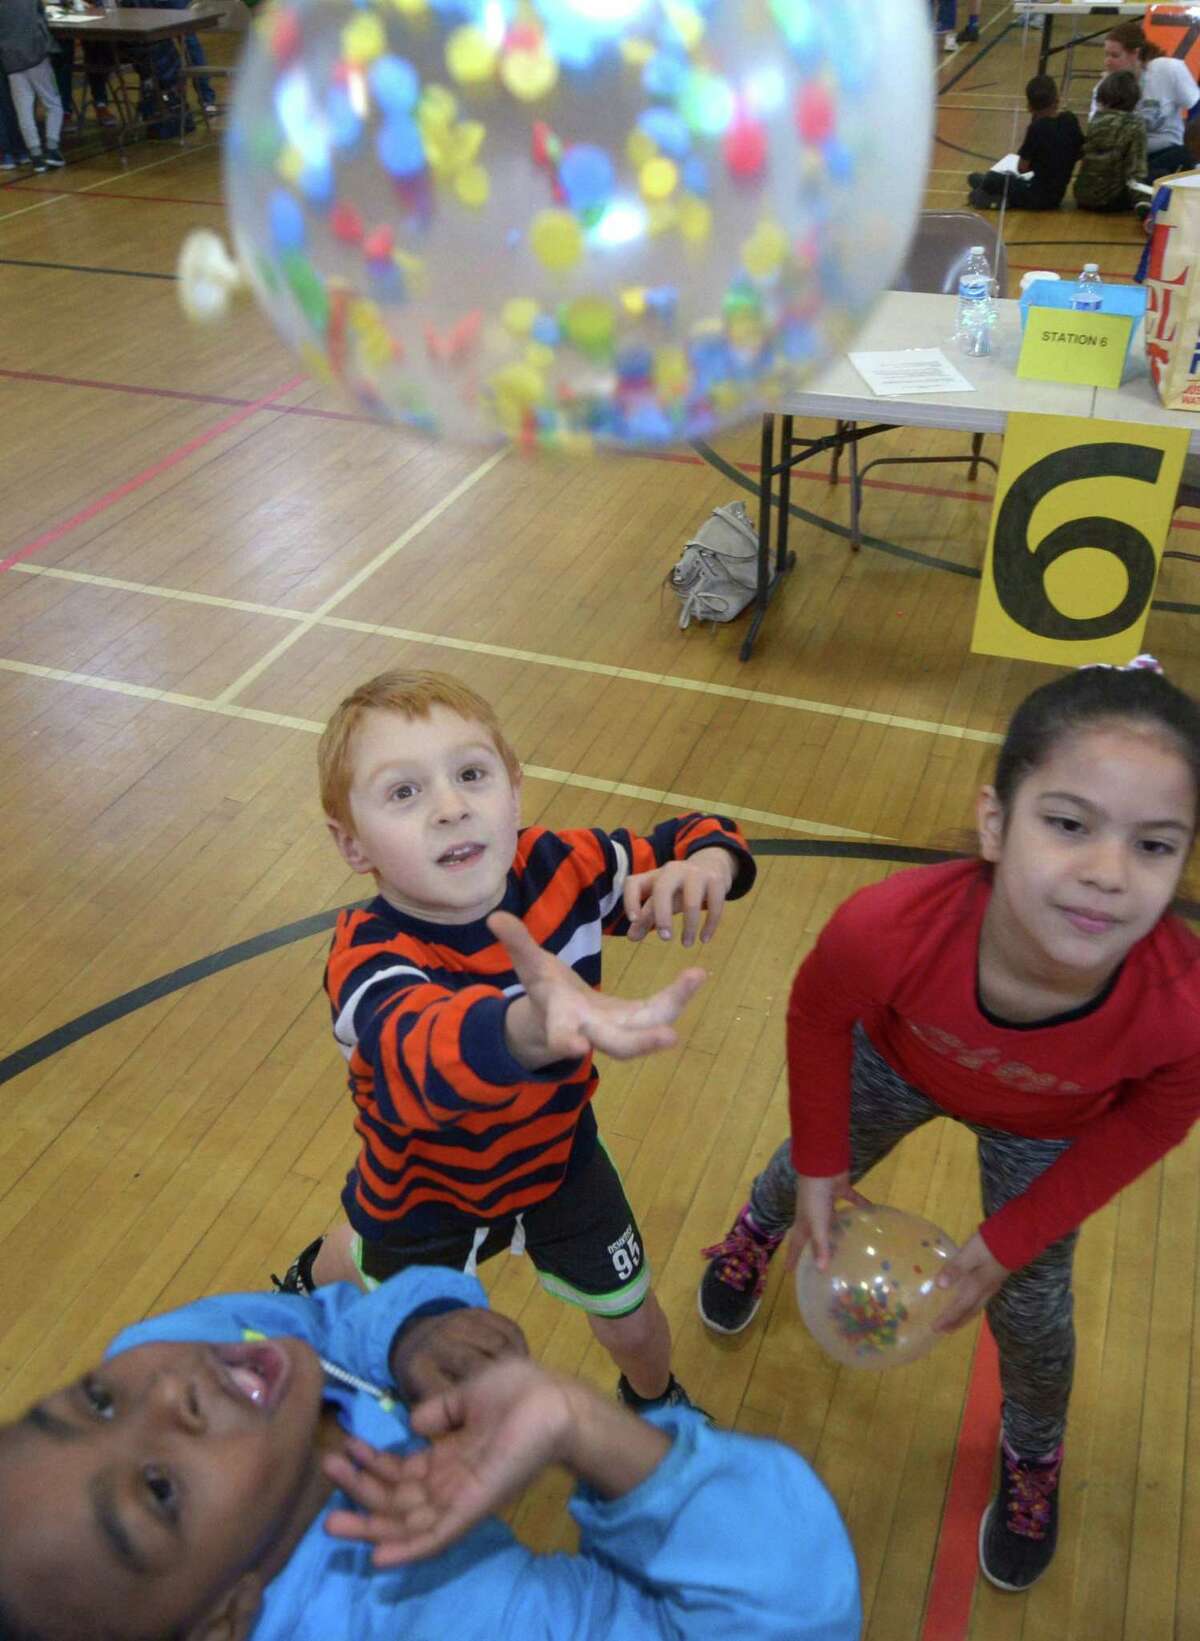 Jaevion Flade, Jake Courtney, and Jaliyah Navarro keep a ball off the ground at the Social Communication Station as Fox Run Elementary School hosts its inaugural ?“Celebrating Differences Day?” Friday, May 12, 2017, at the school in Norwalk, Conn. The day is designed to educate students on various disabilities and encourage them to celebrate everyone's differences.